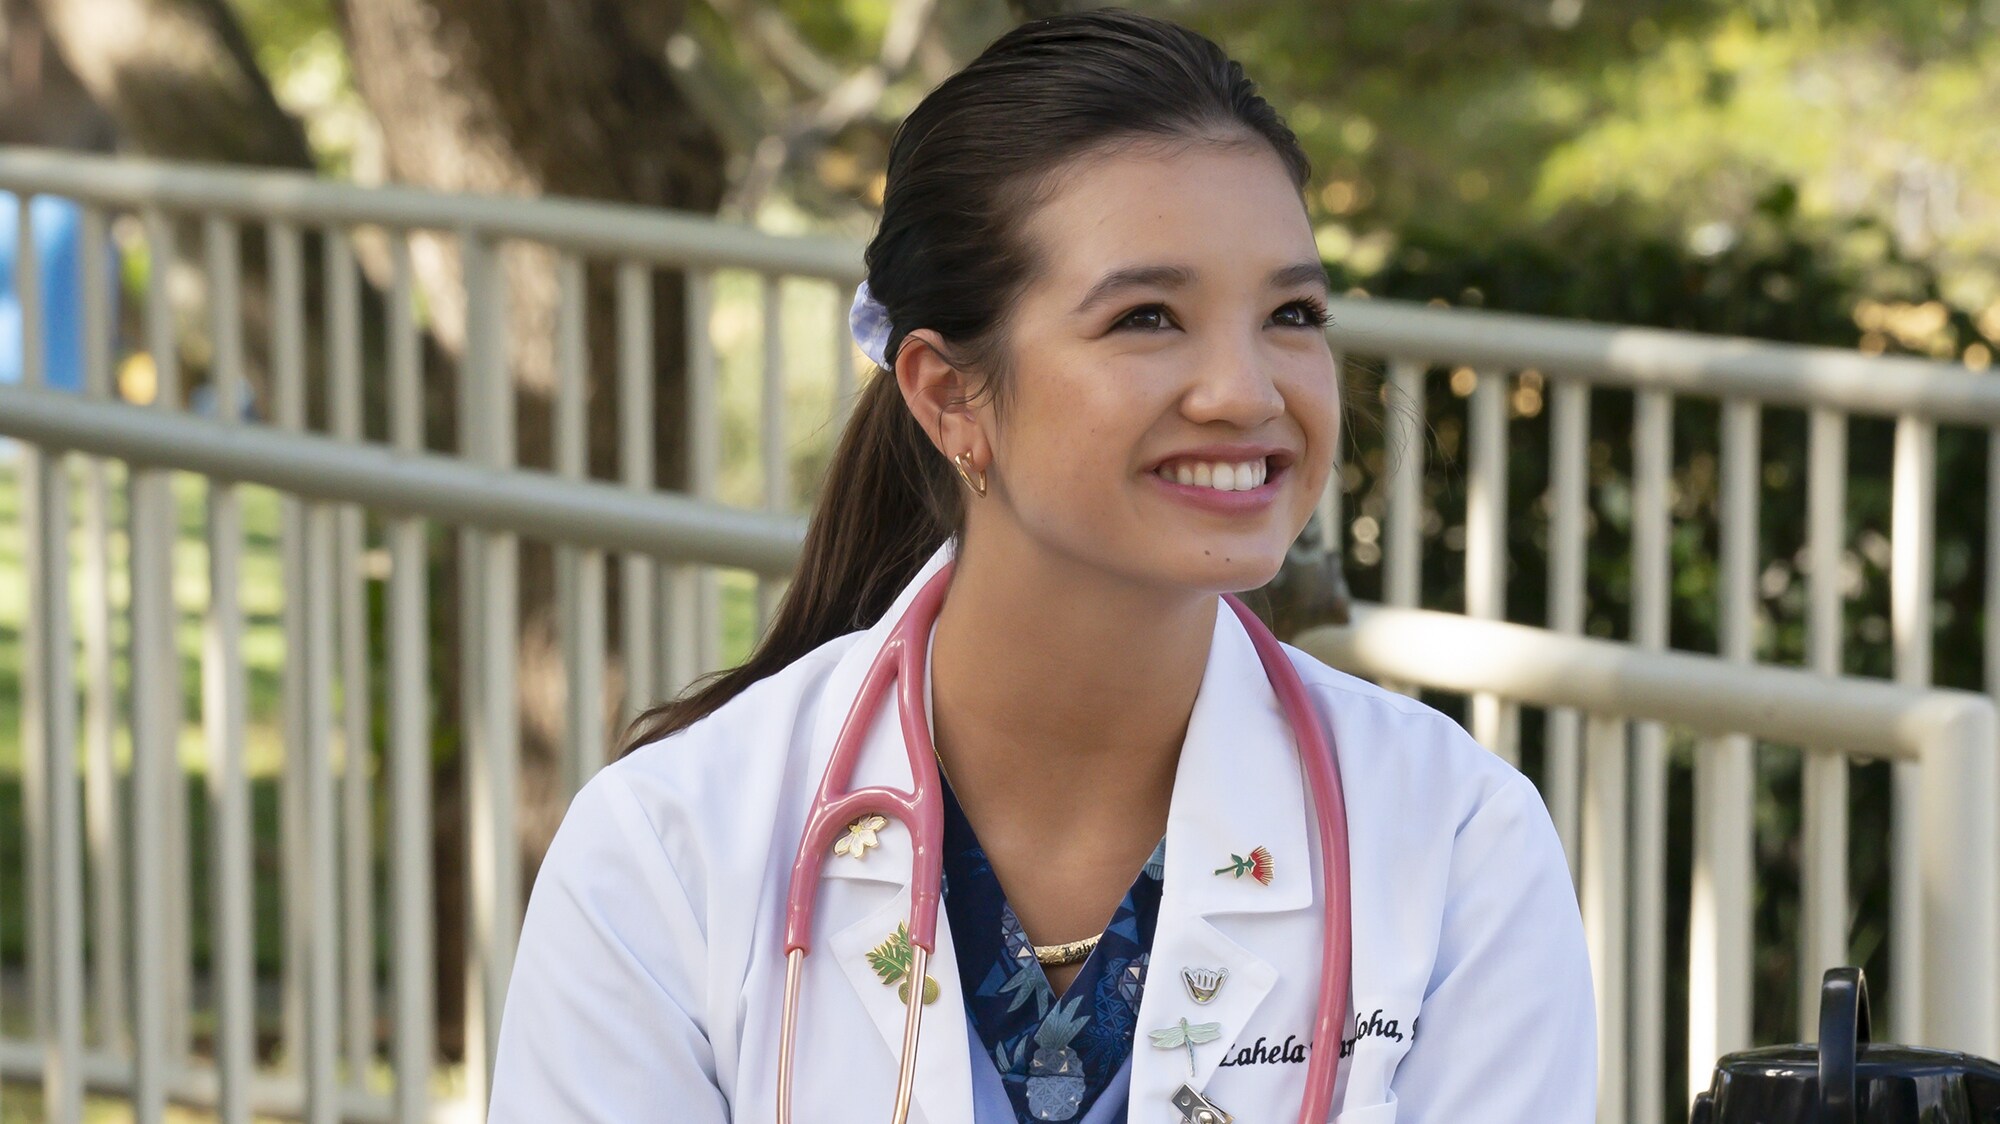 DOOGIE KAMEALOHA, M.D. - "Career Babes" - Lahela tries to fit in by joining the high school dance team; Kai’s new passion worries his parents. (Disney/Karen Neal)  PEYTON ELIZABETH LEE